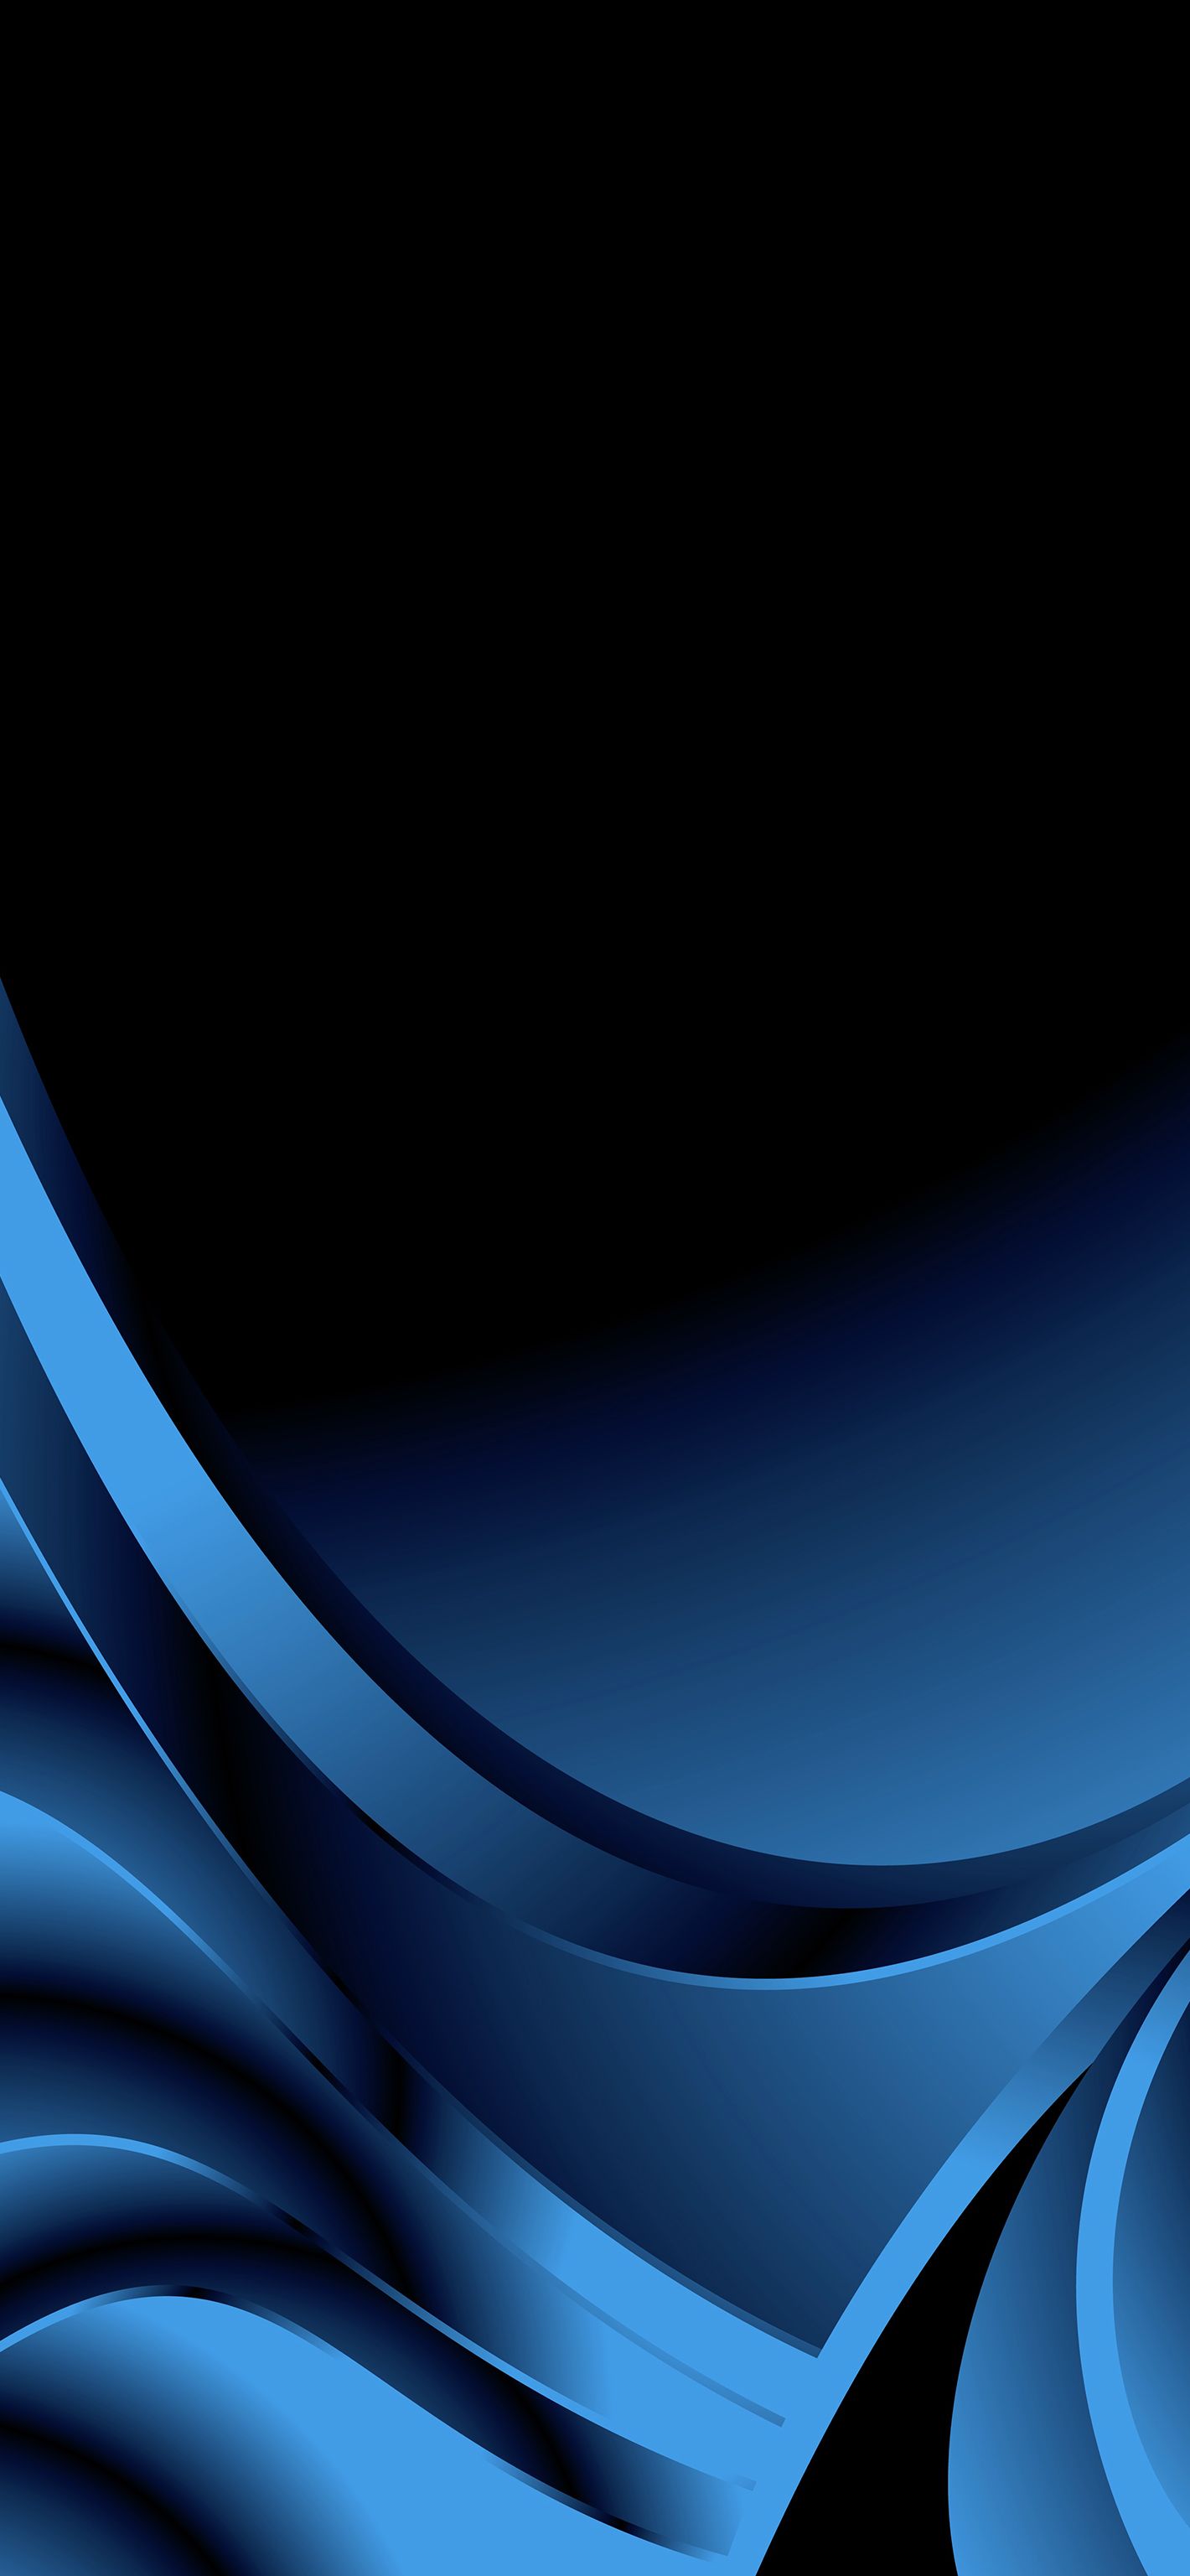 Pacific Blue Waves Central. Blue wallpaper iphone, Xperia wallpaper, Oneplus wallpaper